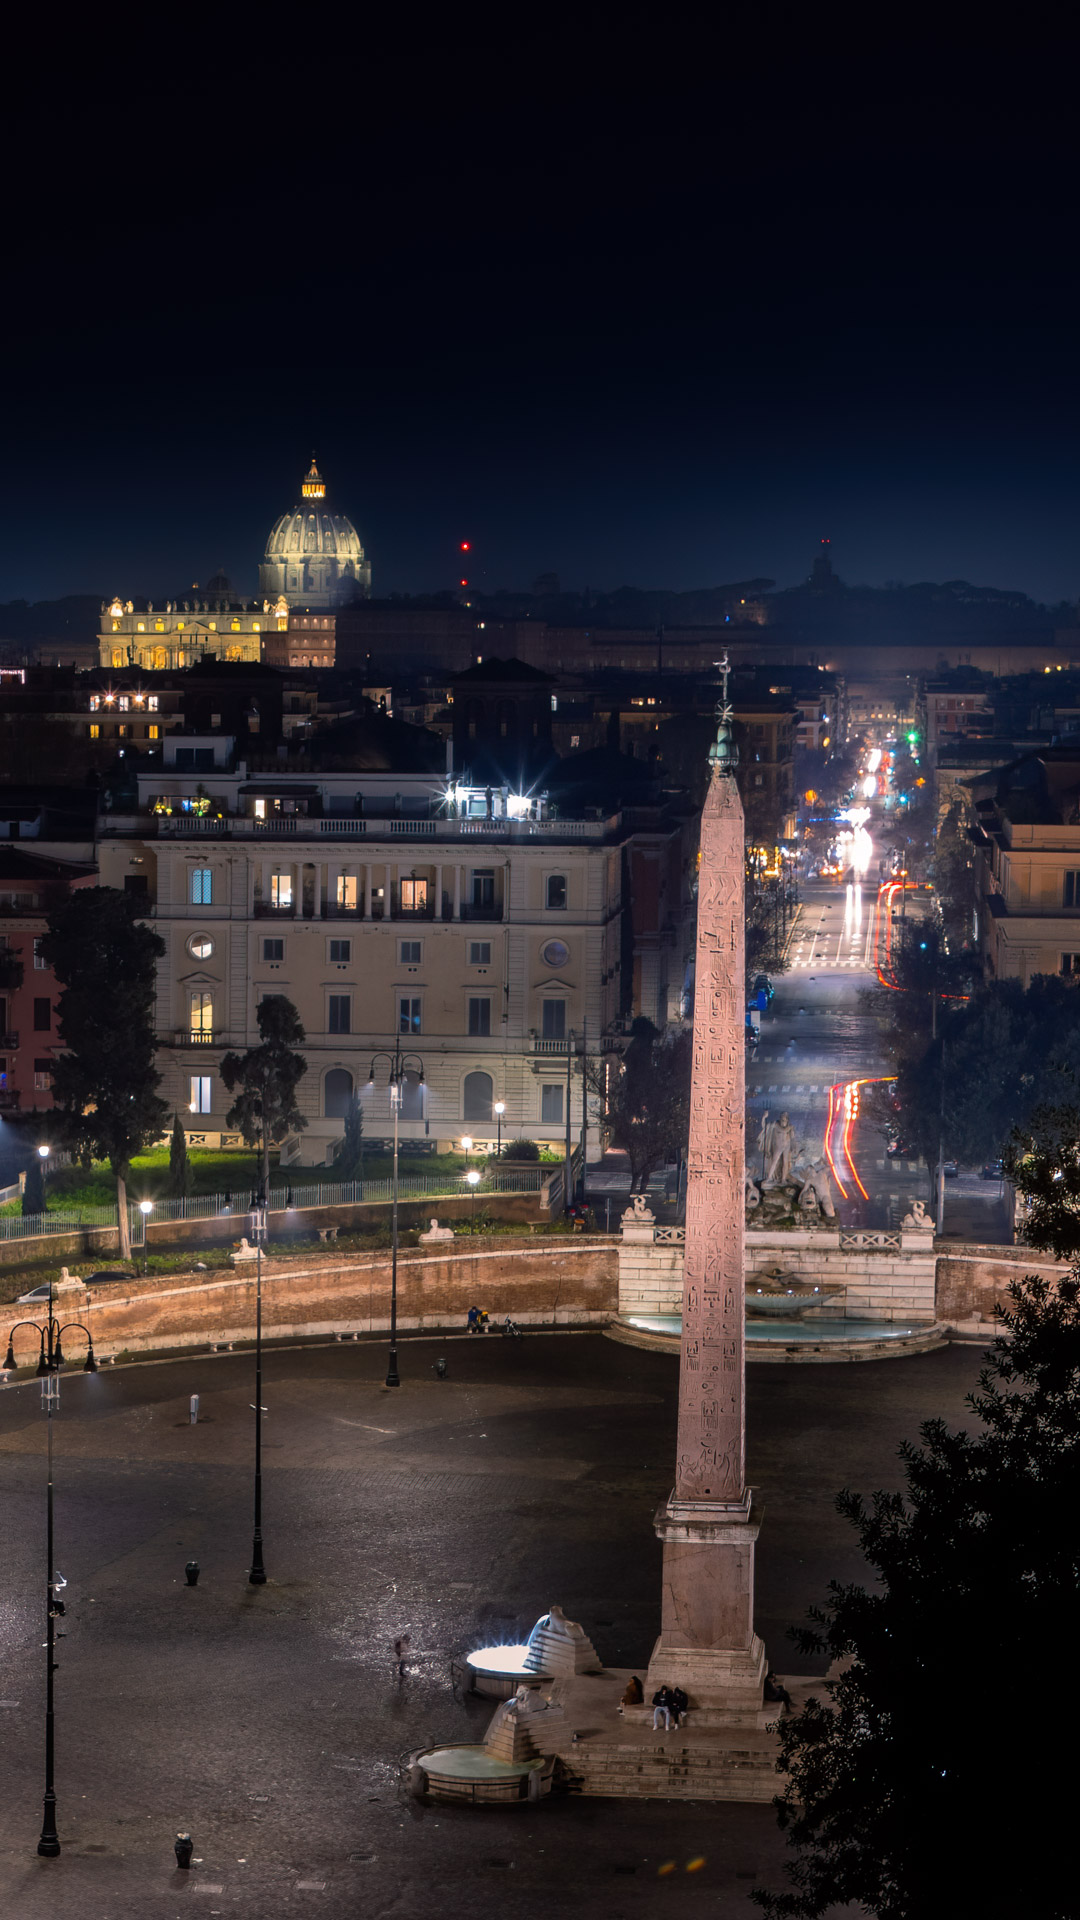 Embrace the beauty of Rome's city lights with this amazing nighttime wallpaper